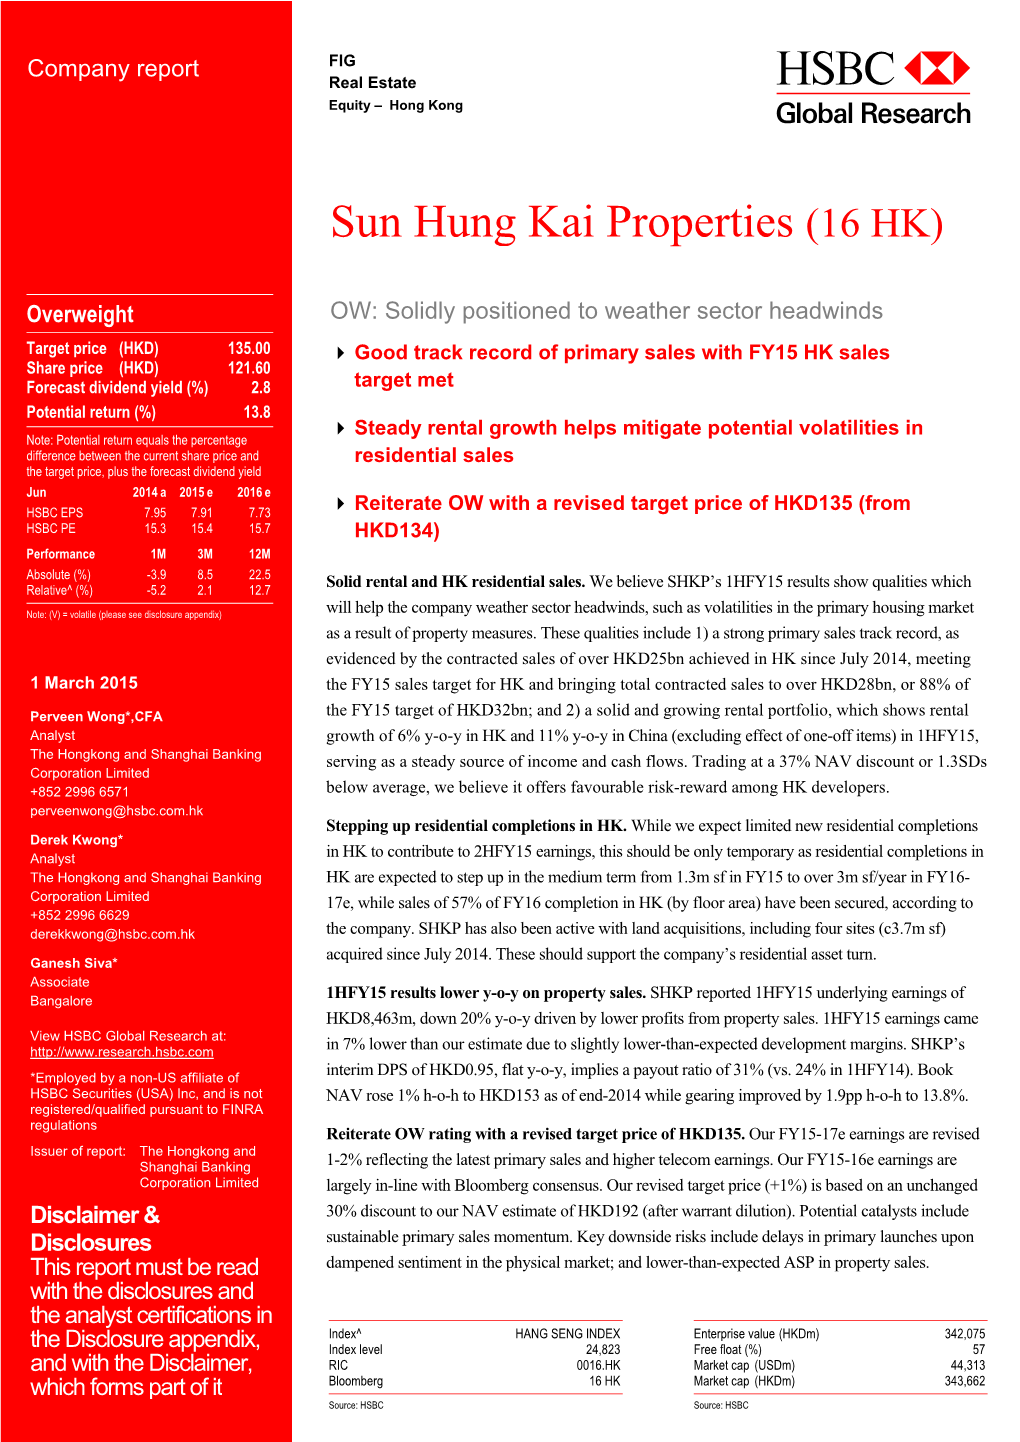 Sun Hung Kai Properties (16 HK)-OW: Solidly Positioned to Weather